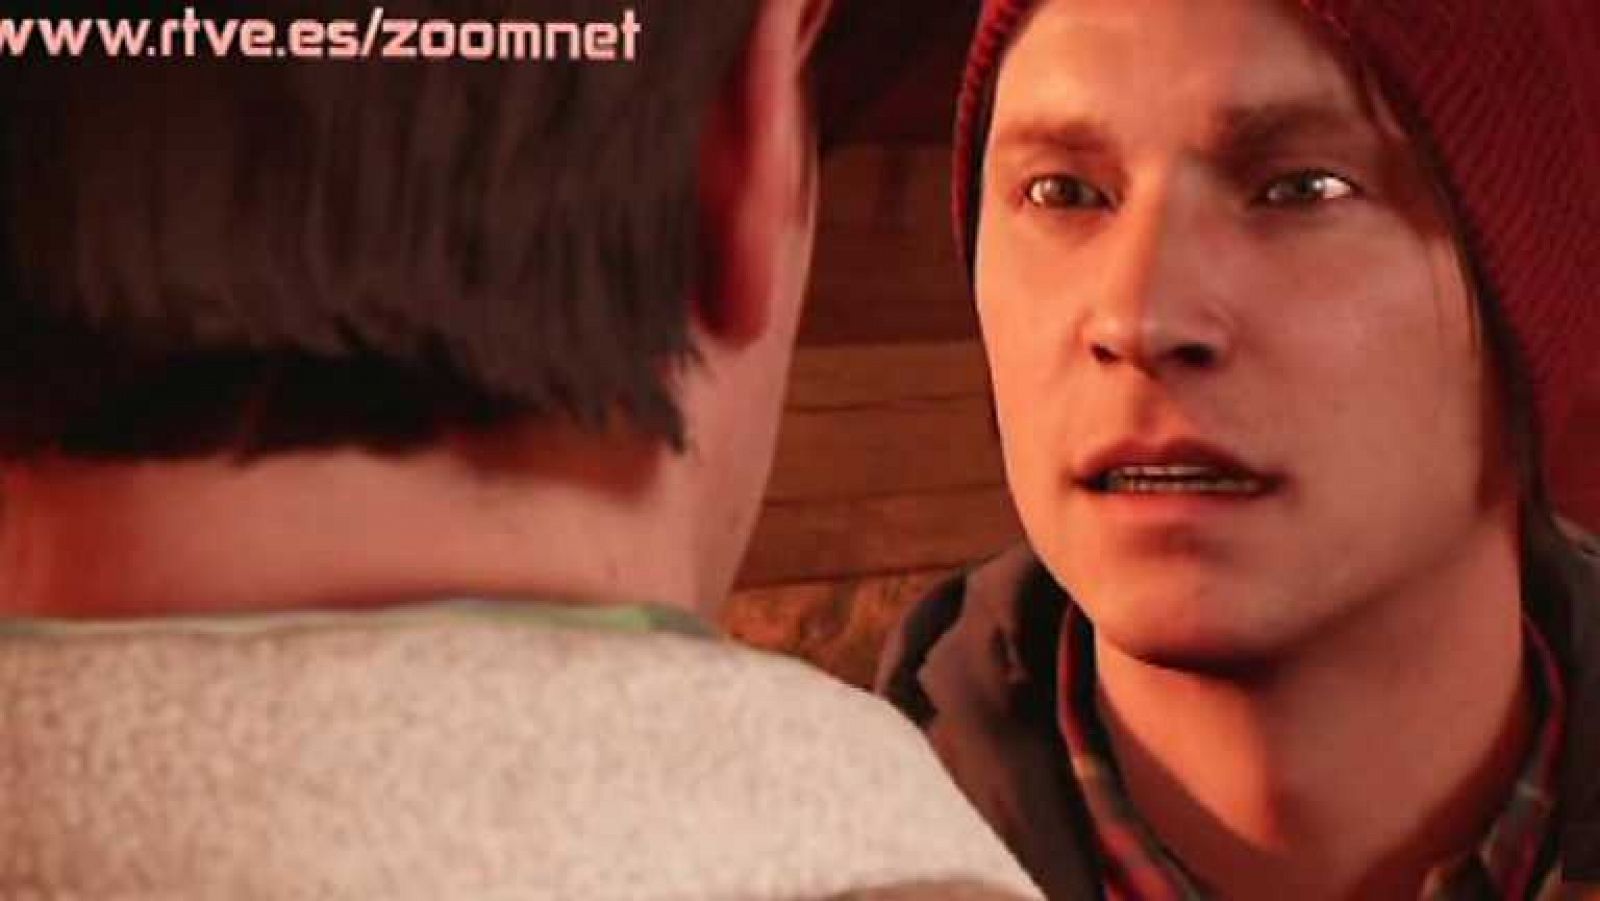 Zoom Net - The App Kids, Monitores LG e Infamous Second Son - 22/03/14